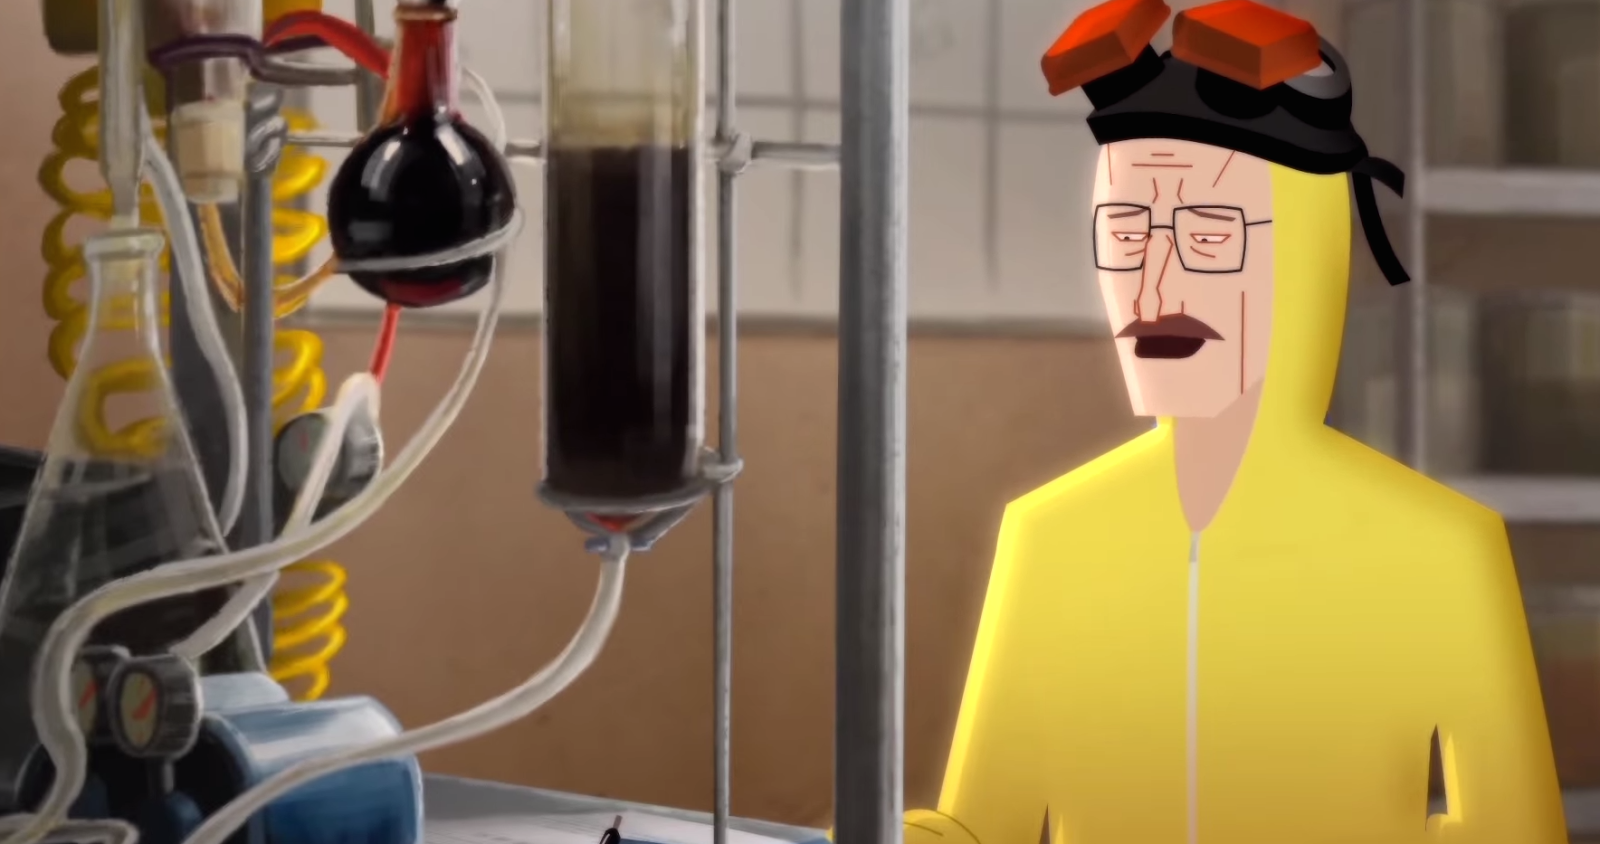 Do You Want to Build a Meth Lab? - Frozen x Breaking Bad Parodie